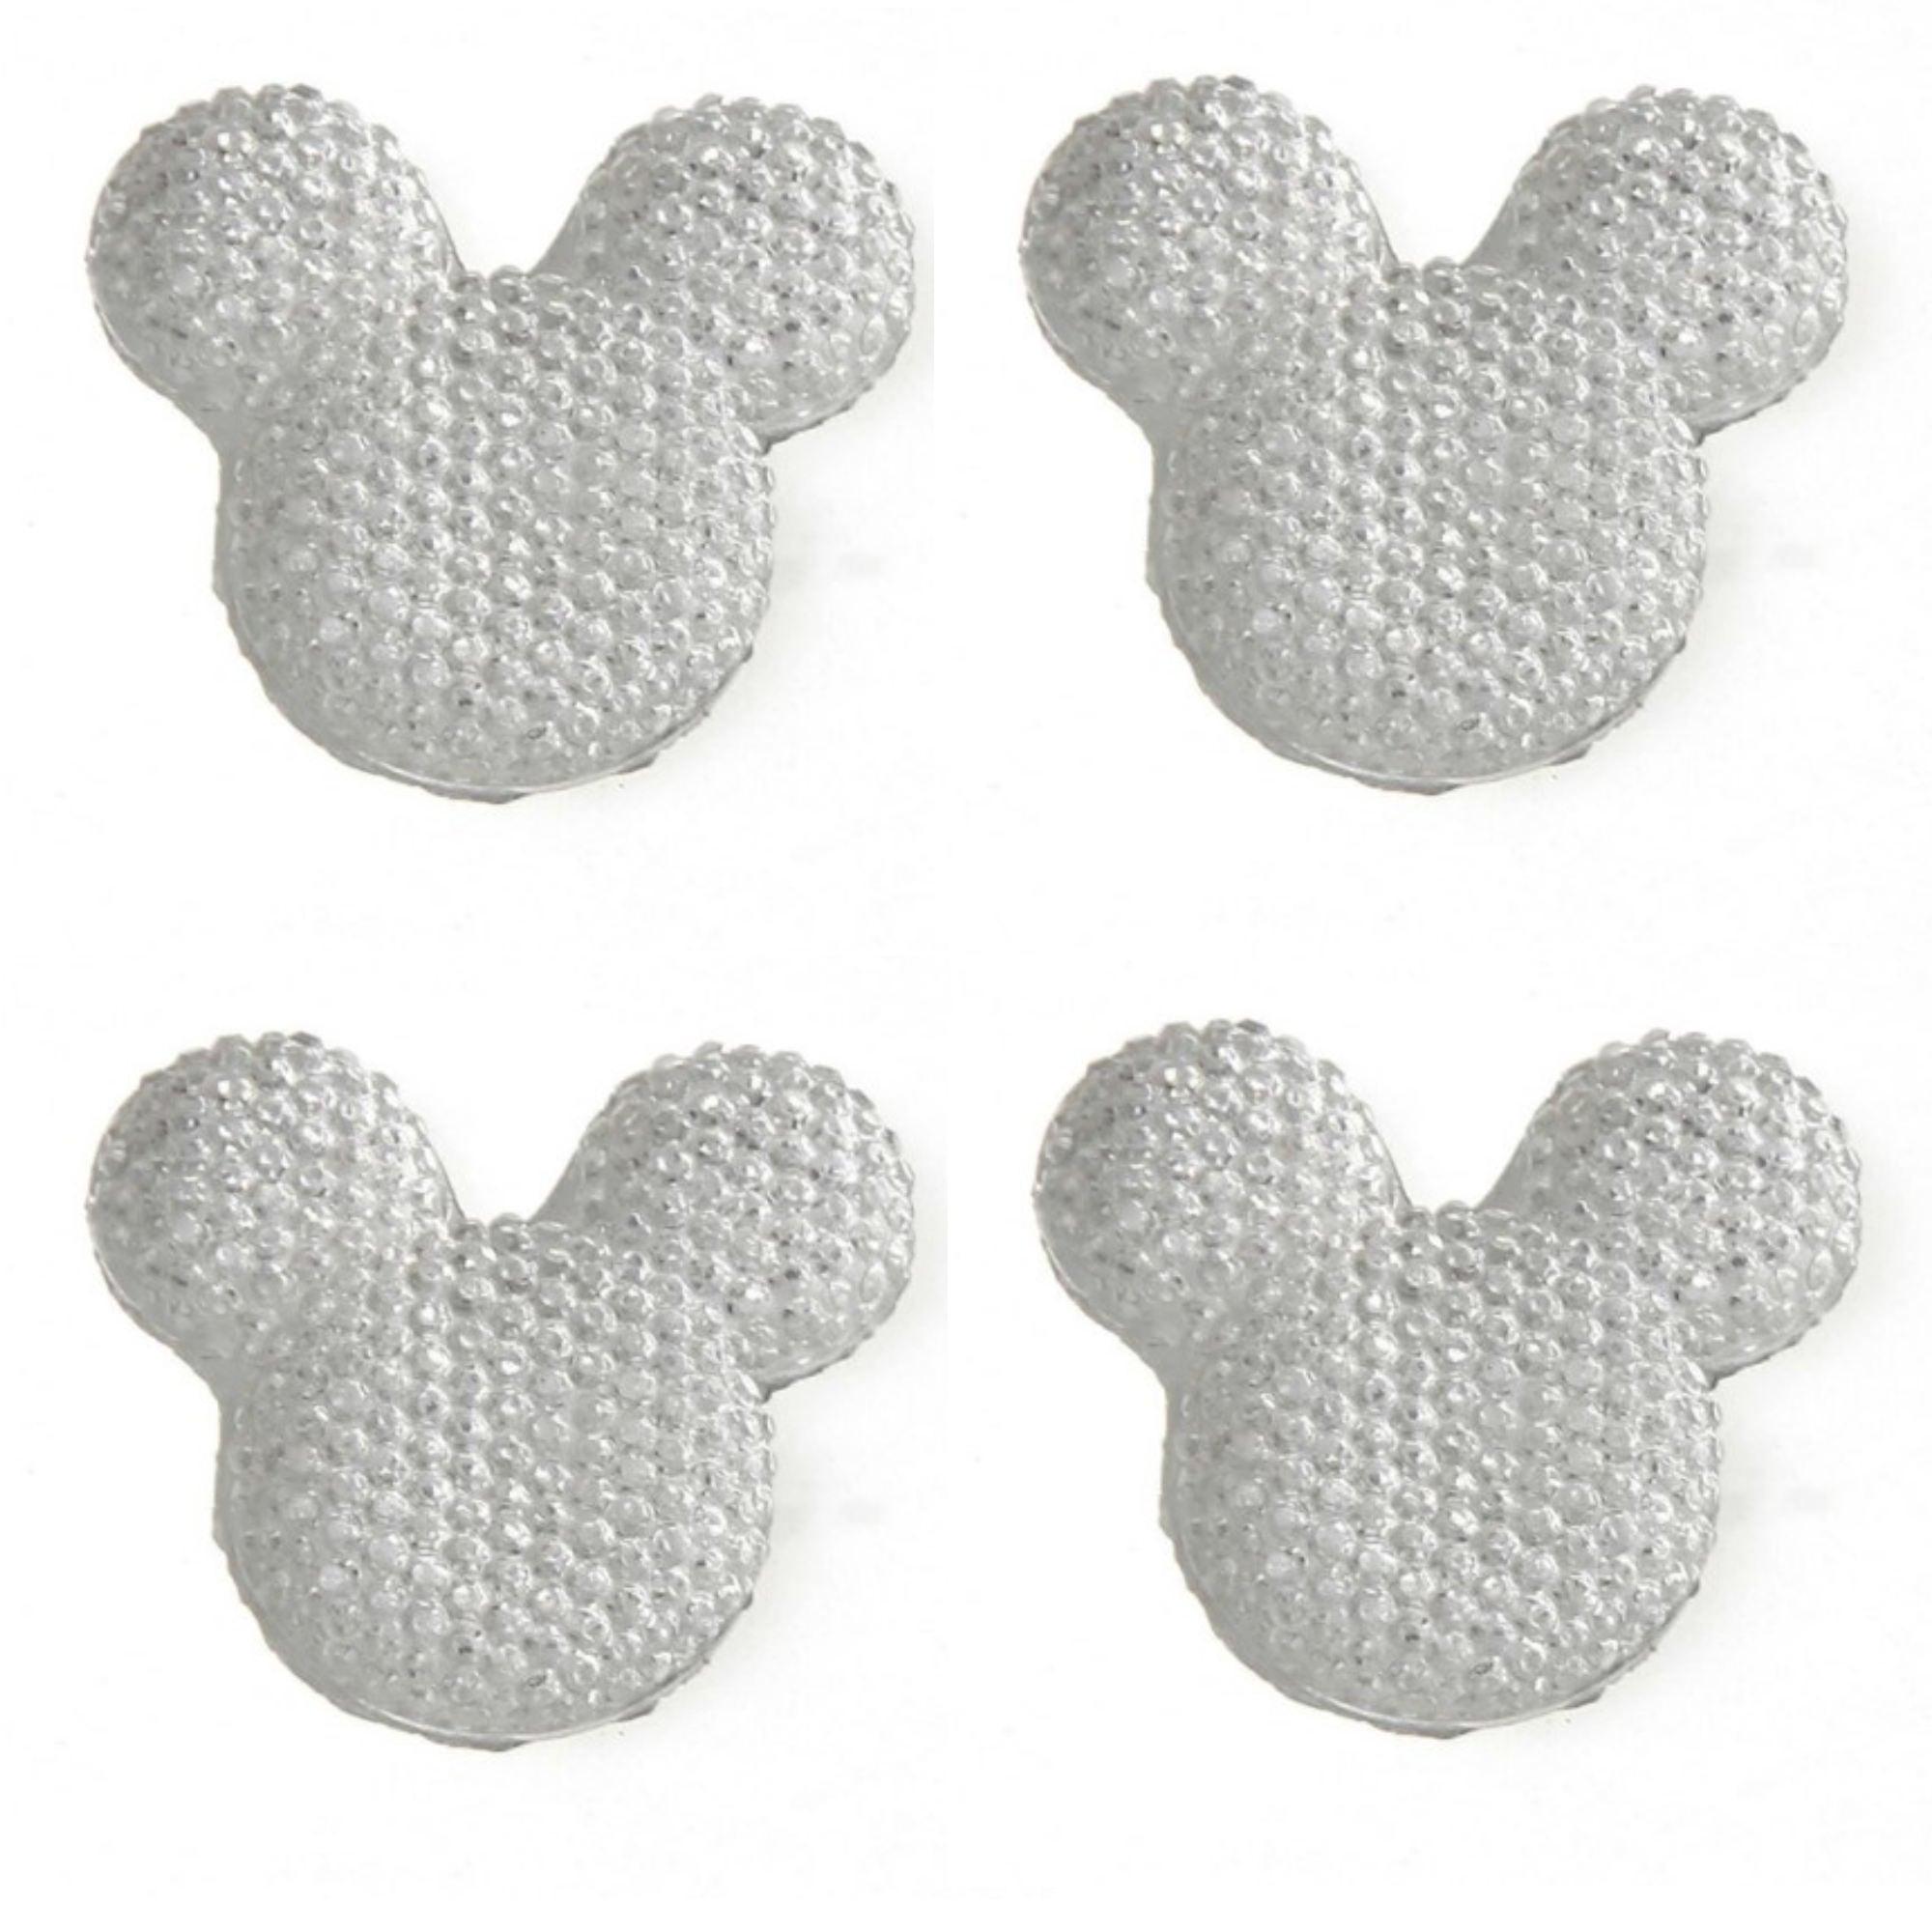 Disneyana Collection 1.25" Bling White Mouse Ears Scrapbook Embellishments by SSC Designs - 4 Pieces